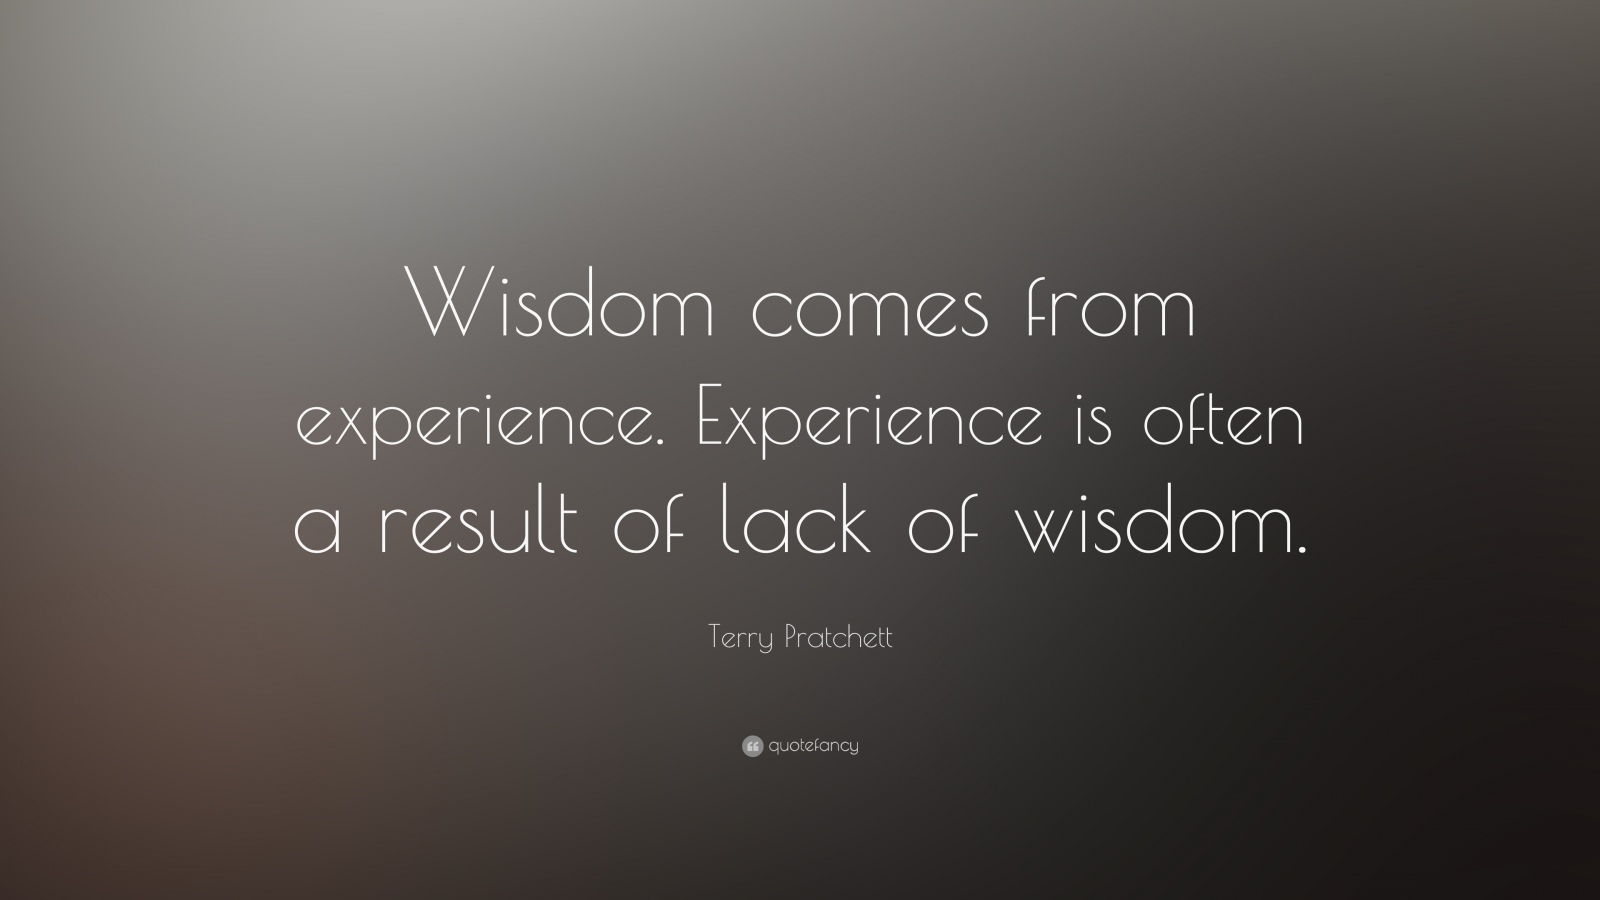 60 Best Quotes & Sayings About Experience